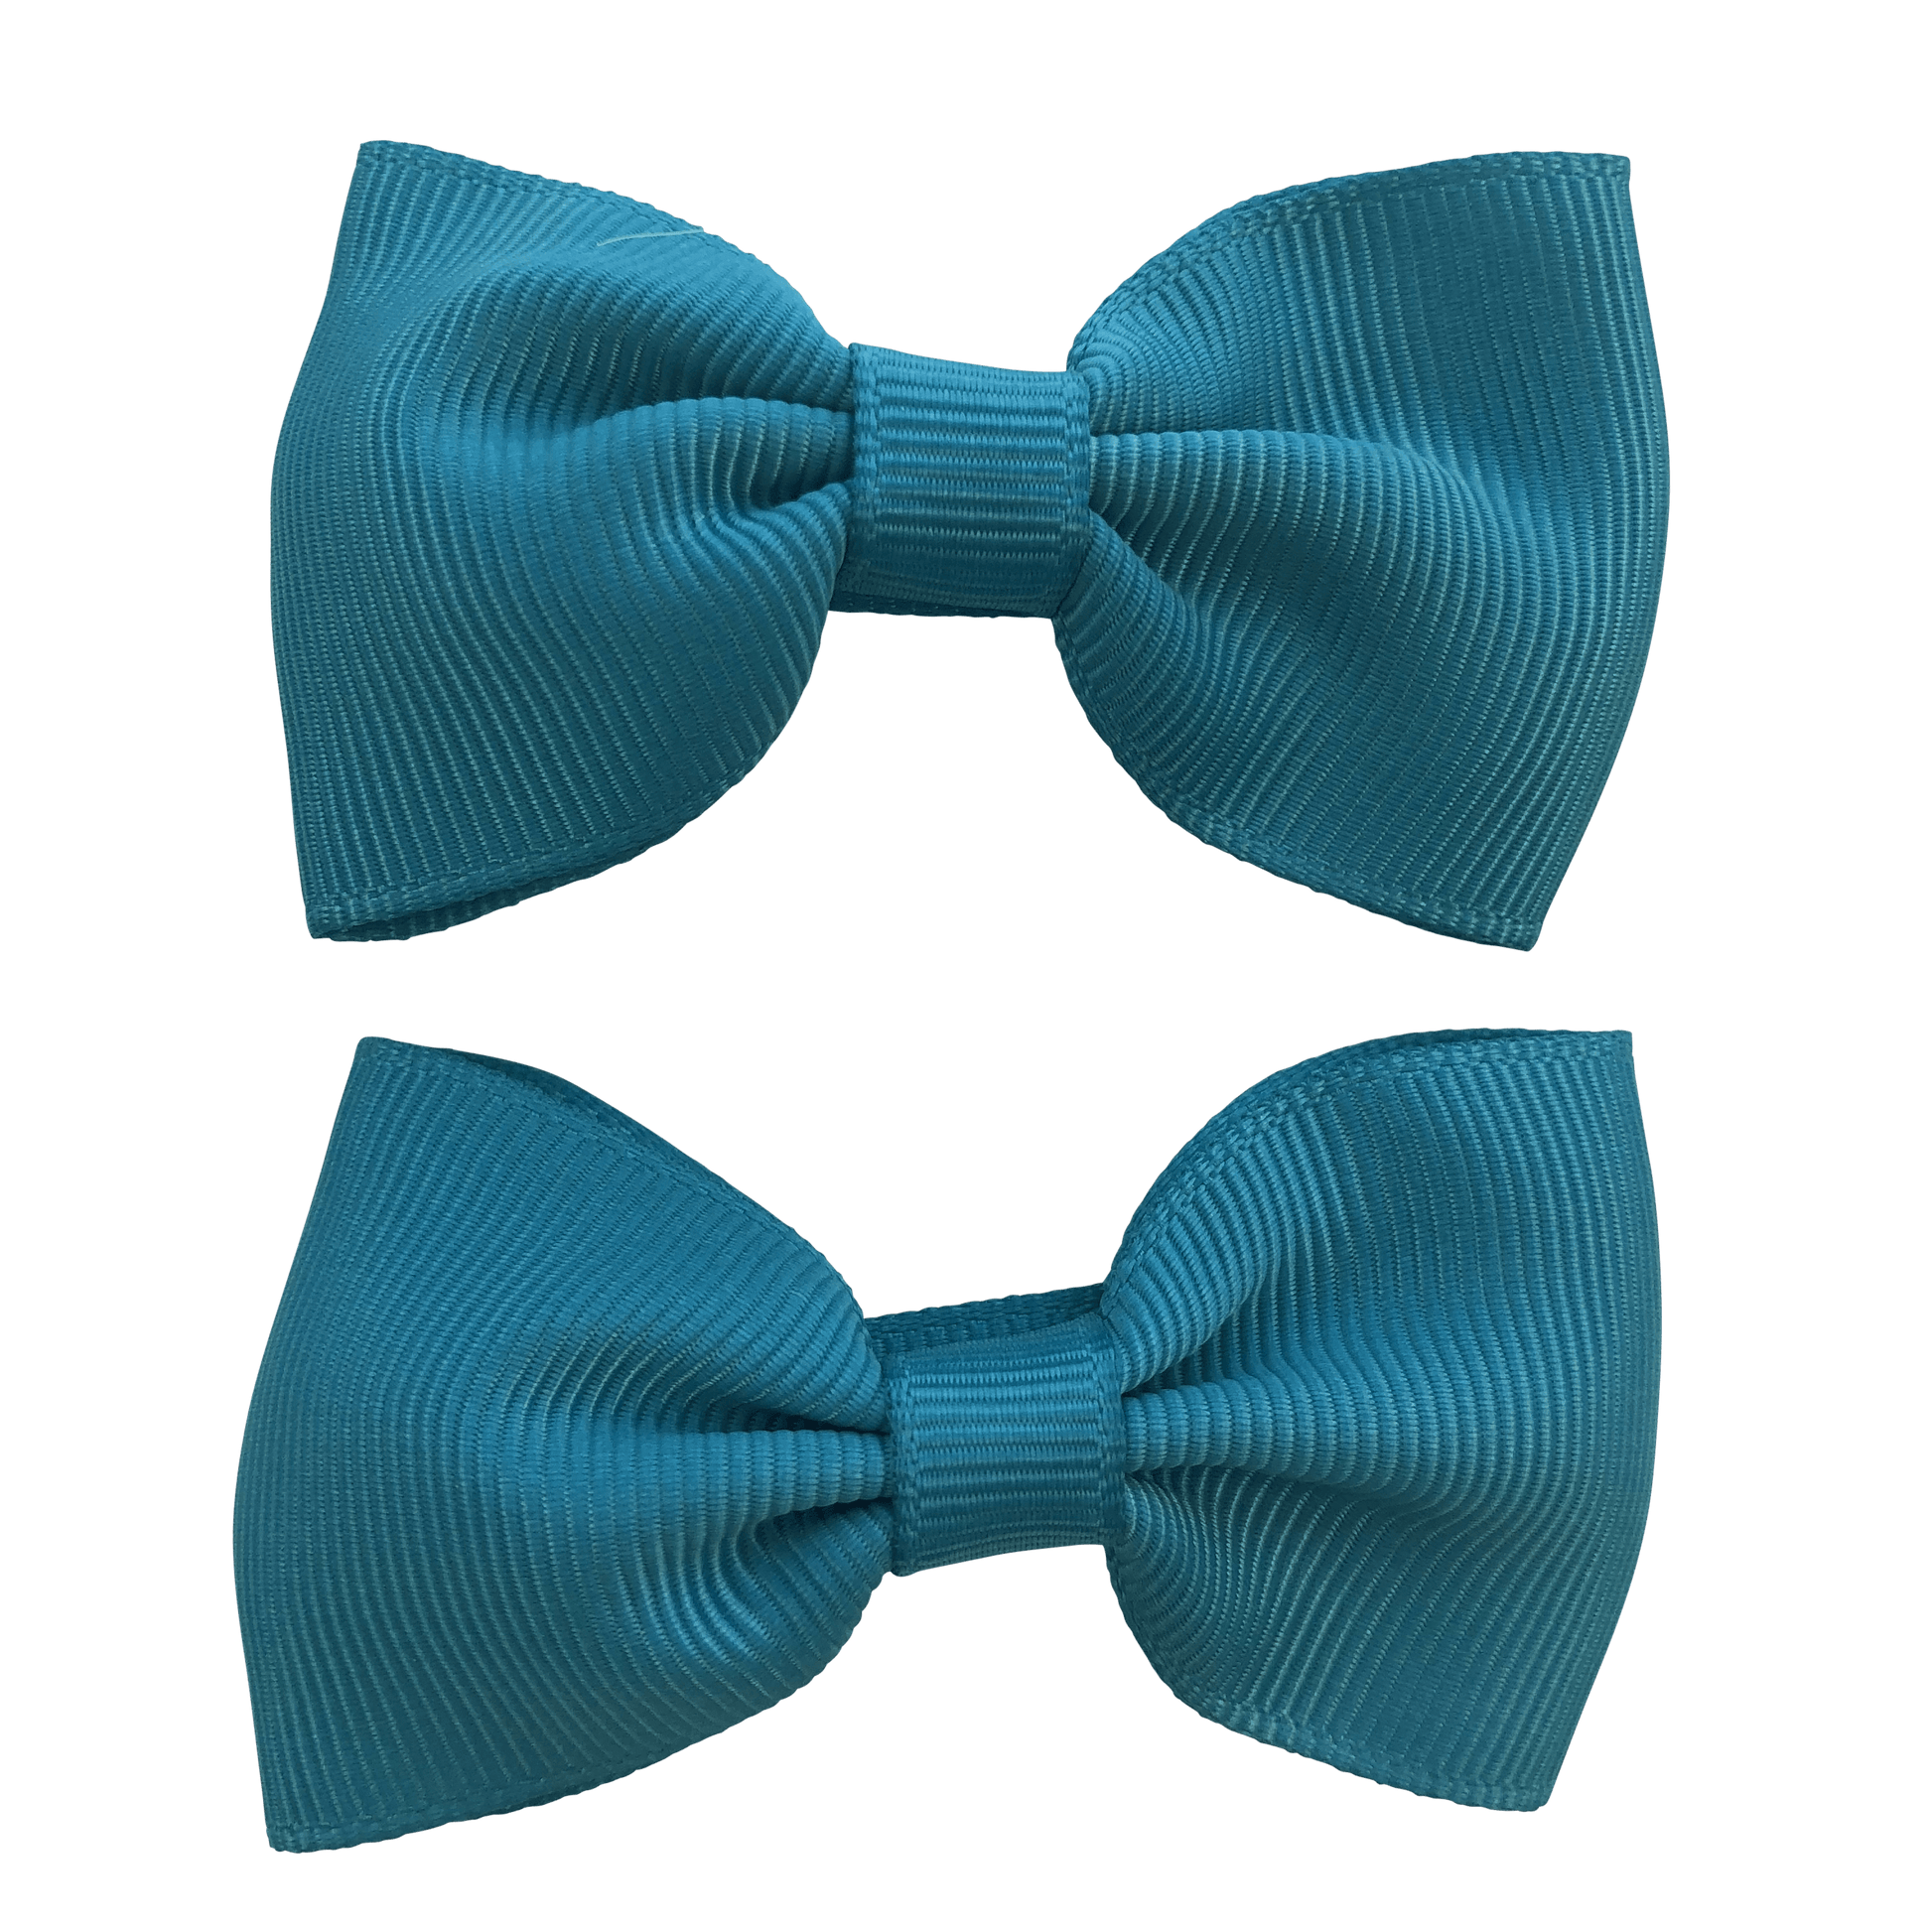 Teal Hair Accessories - Assorted Hair Accessories - School Uniform Hair Accessories - Ponytails and Fairytales